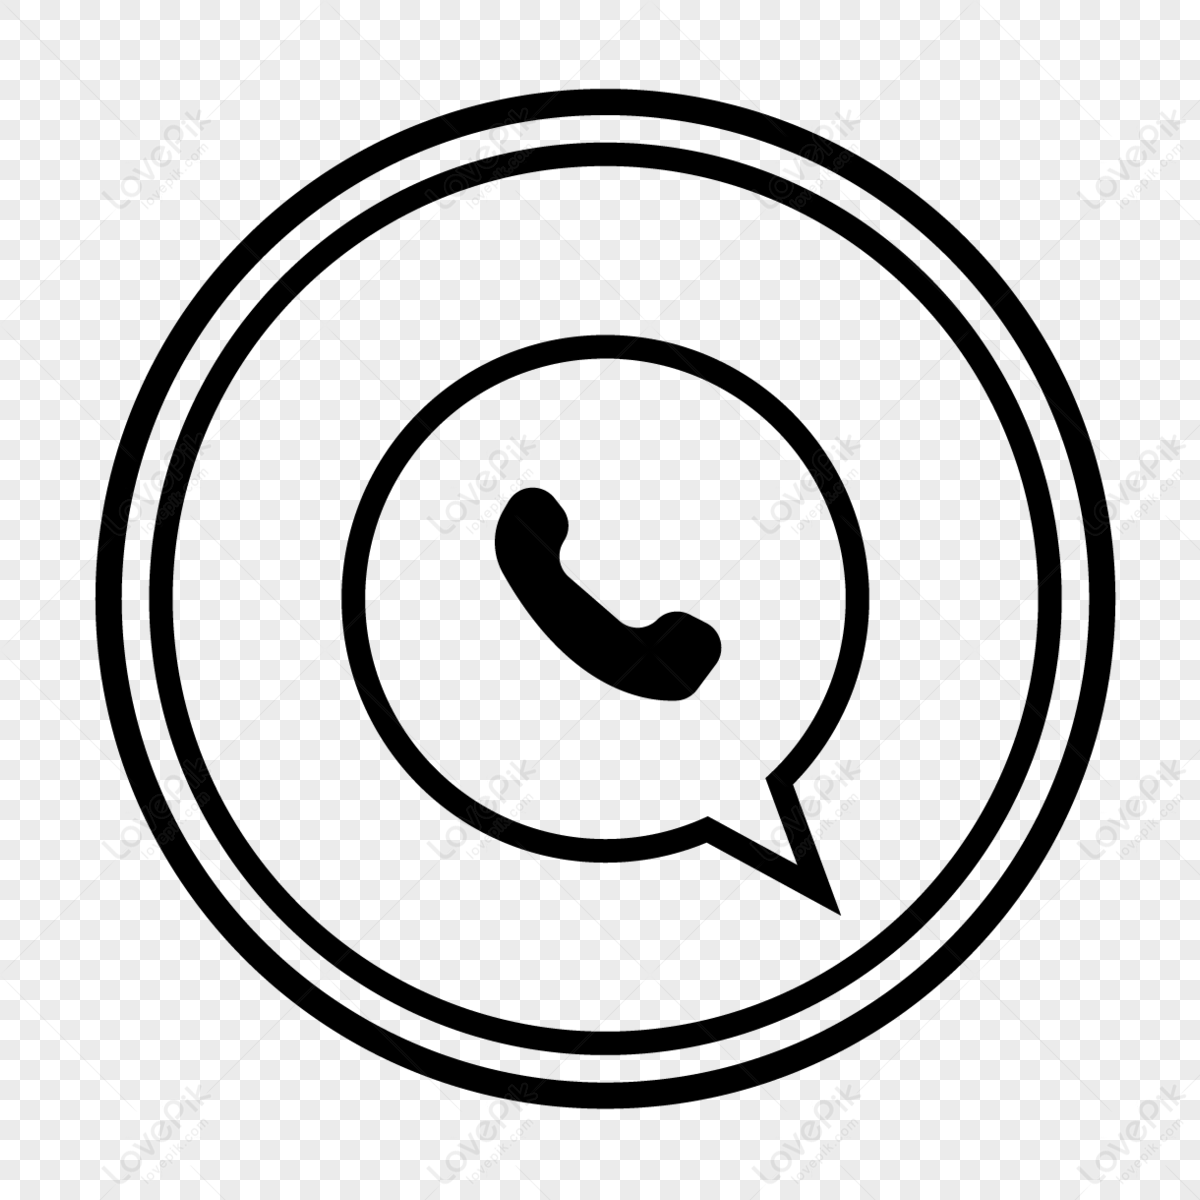 Whatsapp Logo png images